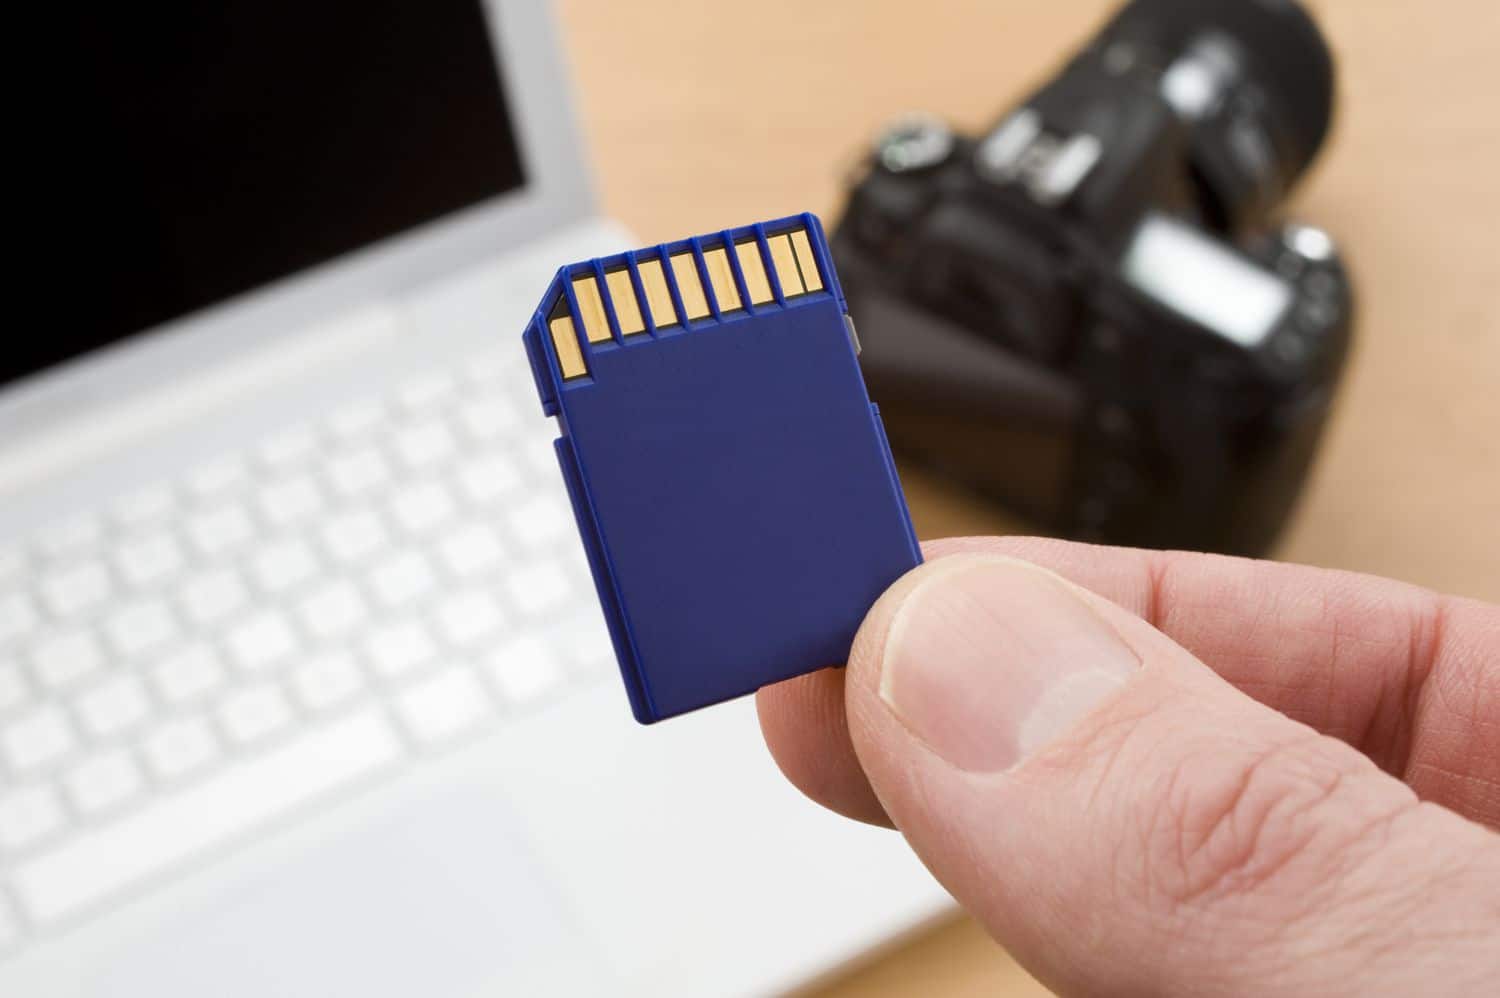 How to Reformat SD Card